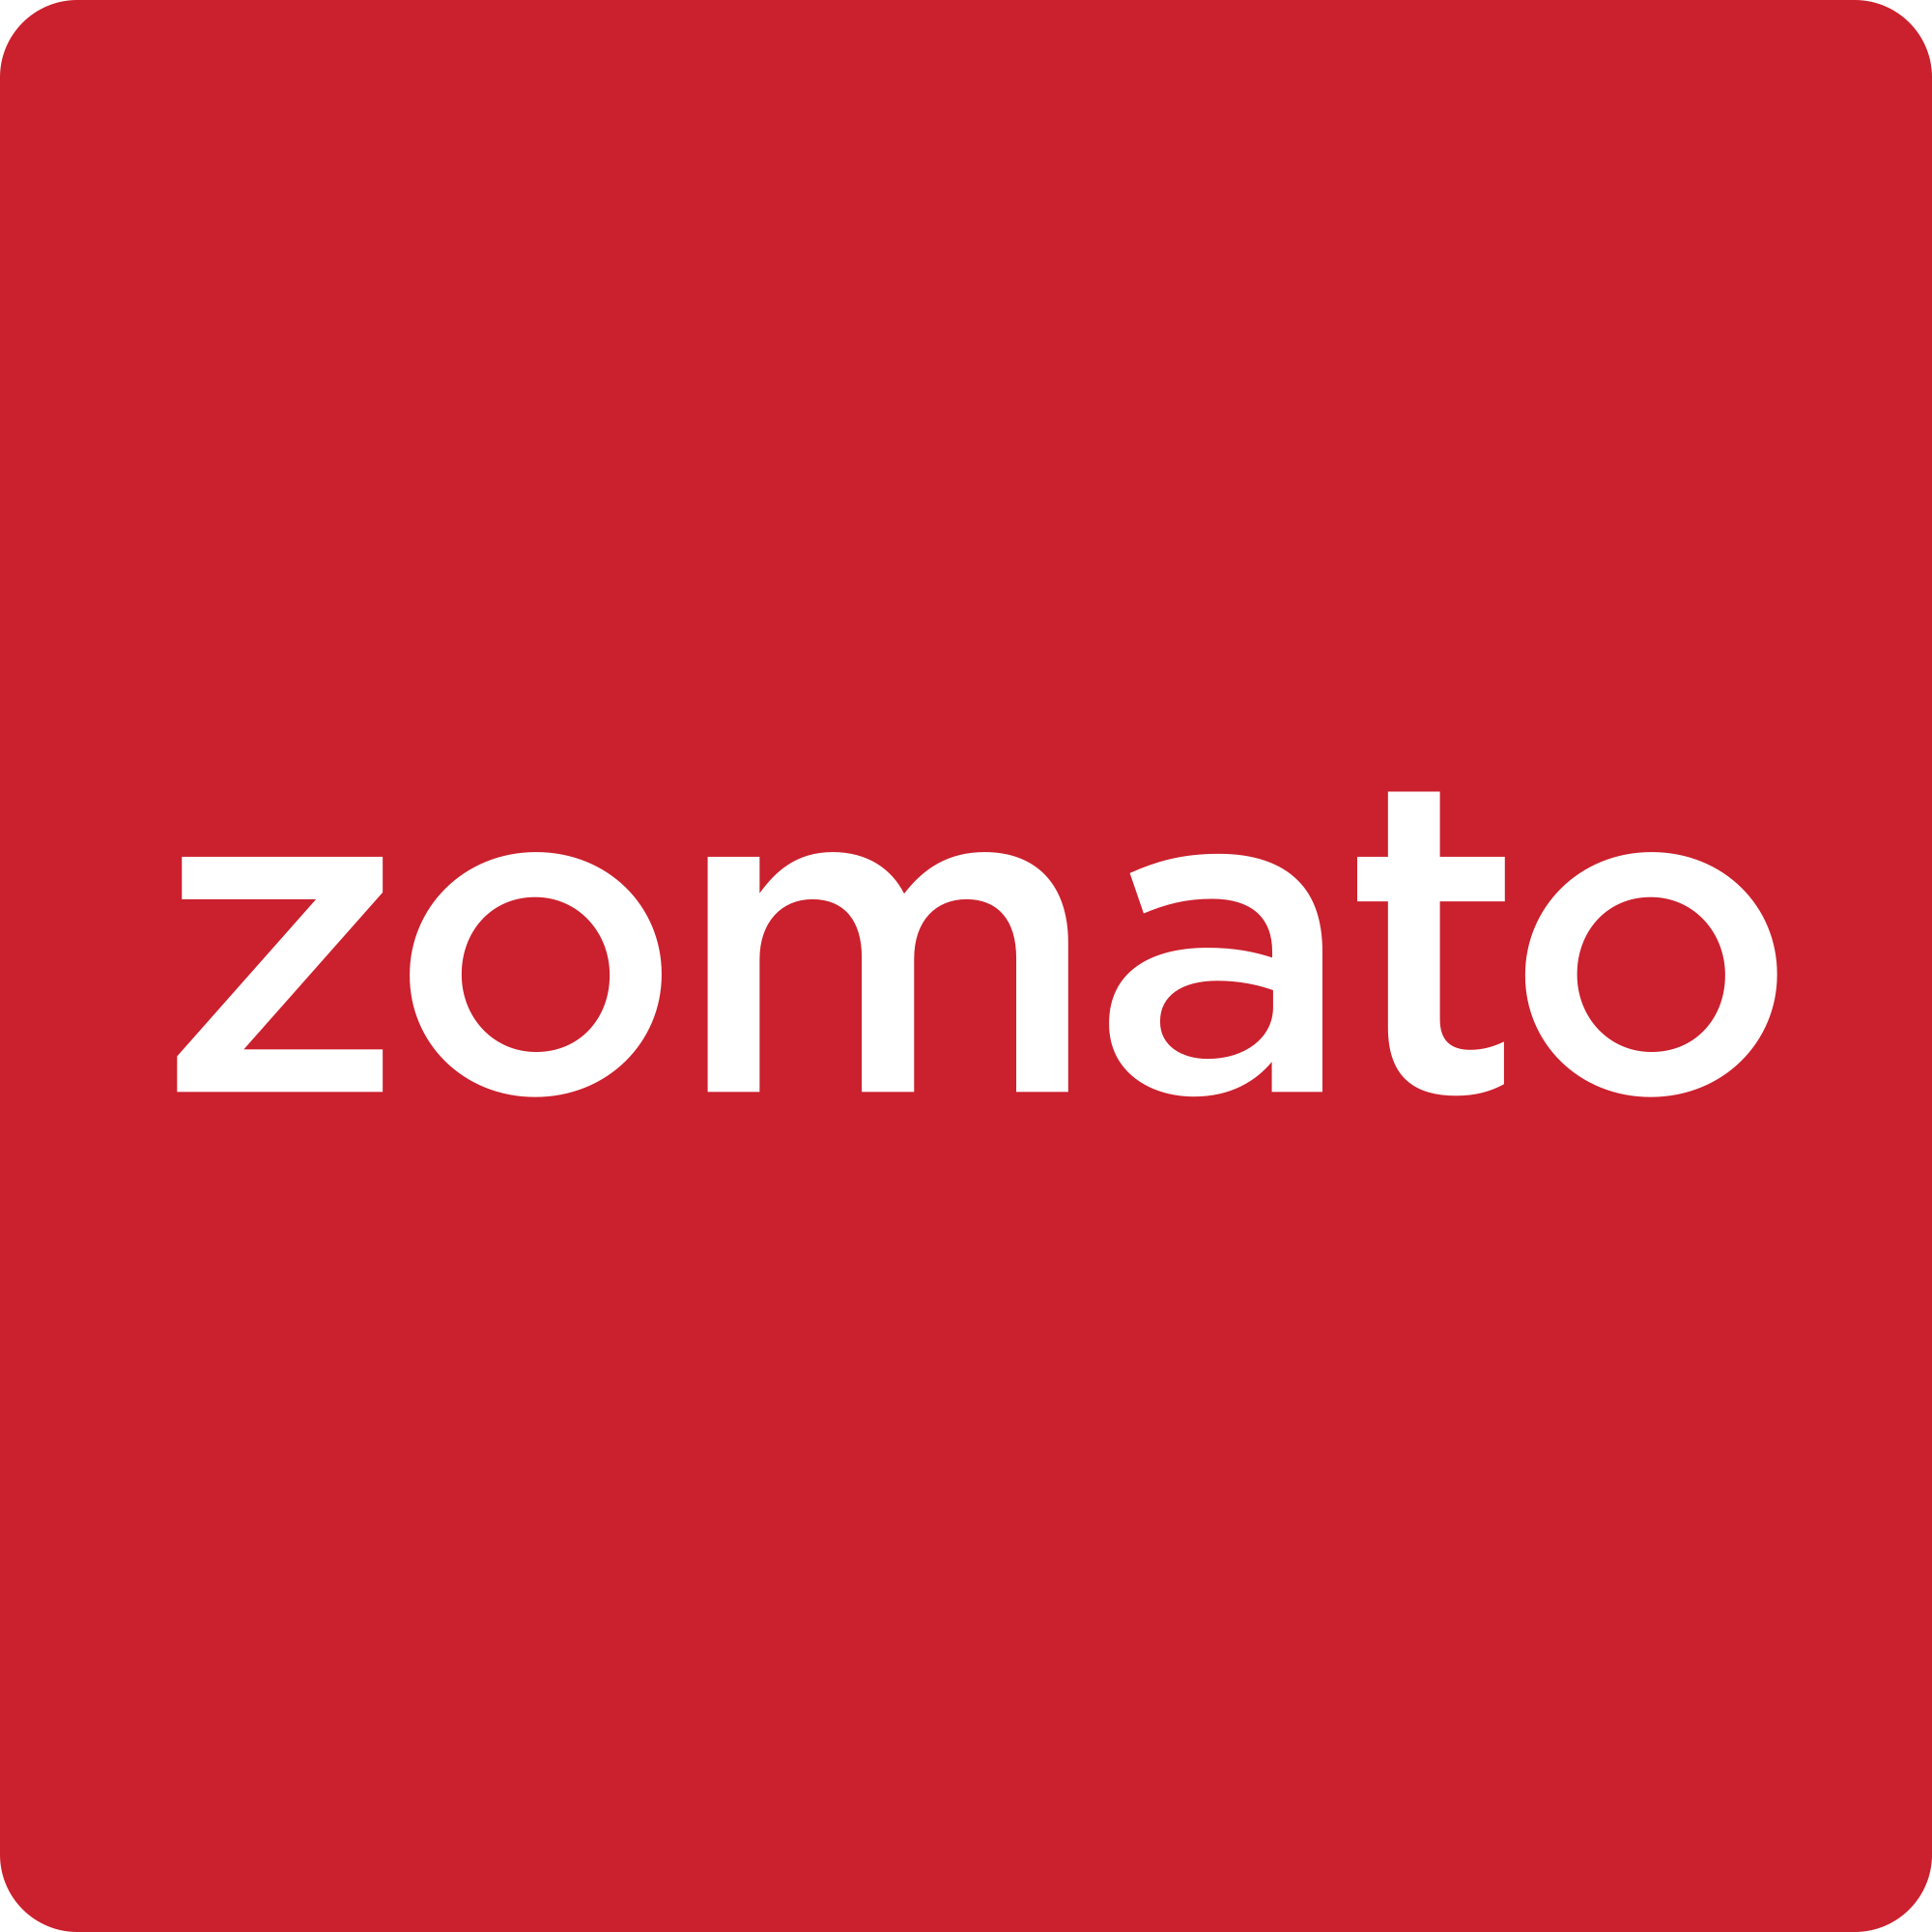 Some Zomato delivery partners to go on strike in Kolkata from Monday